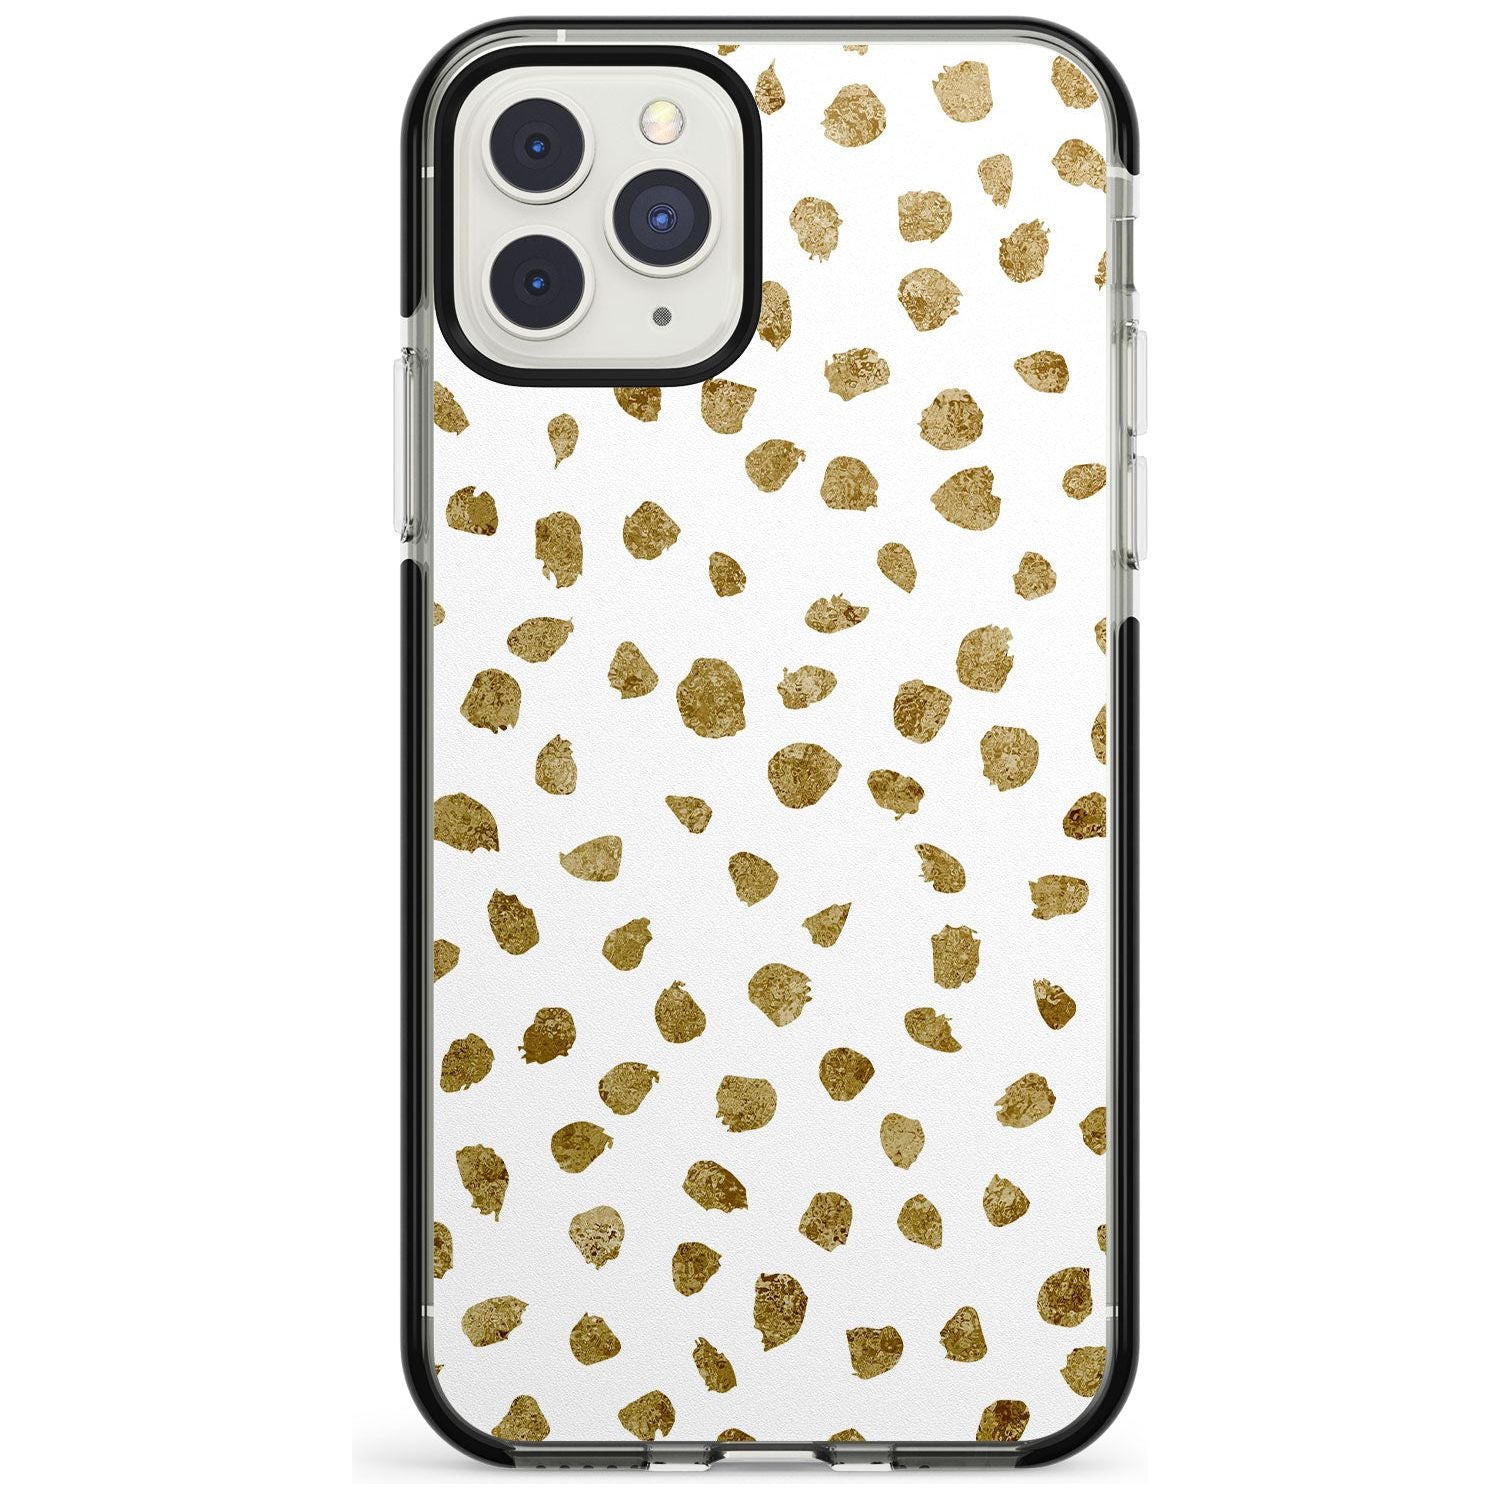 Gold Look on White Dalmatian Polka Dot Spots Black Impact Phone Case for iPhone 11 Pro Max